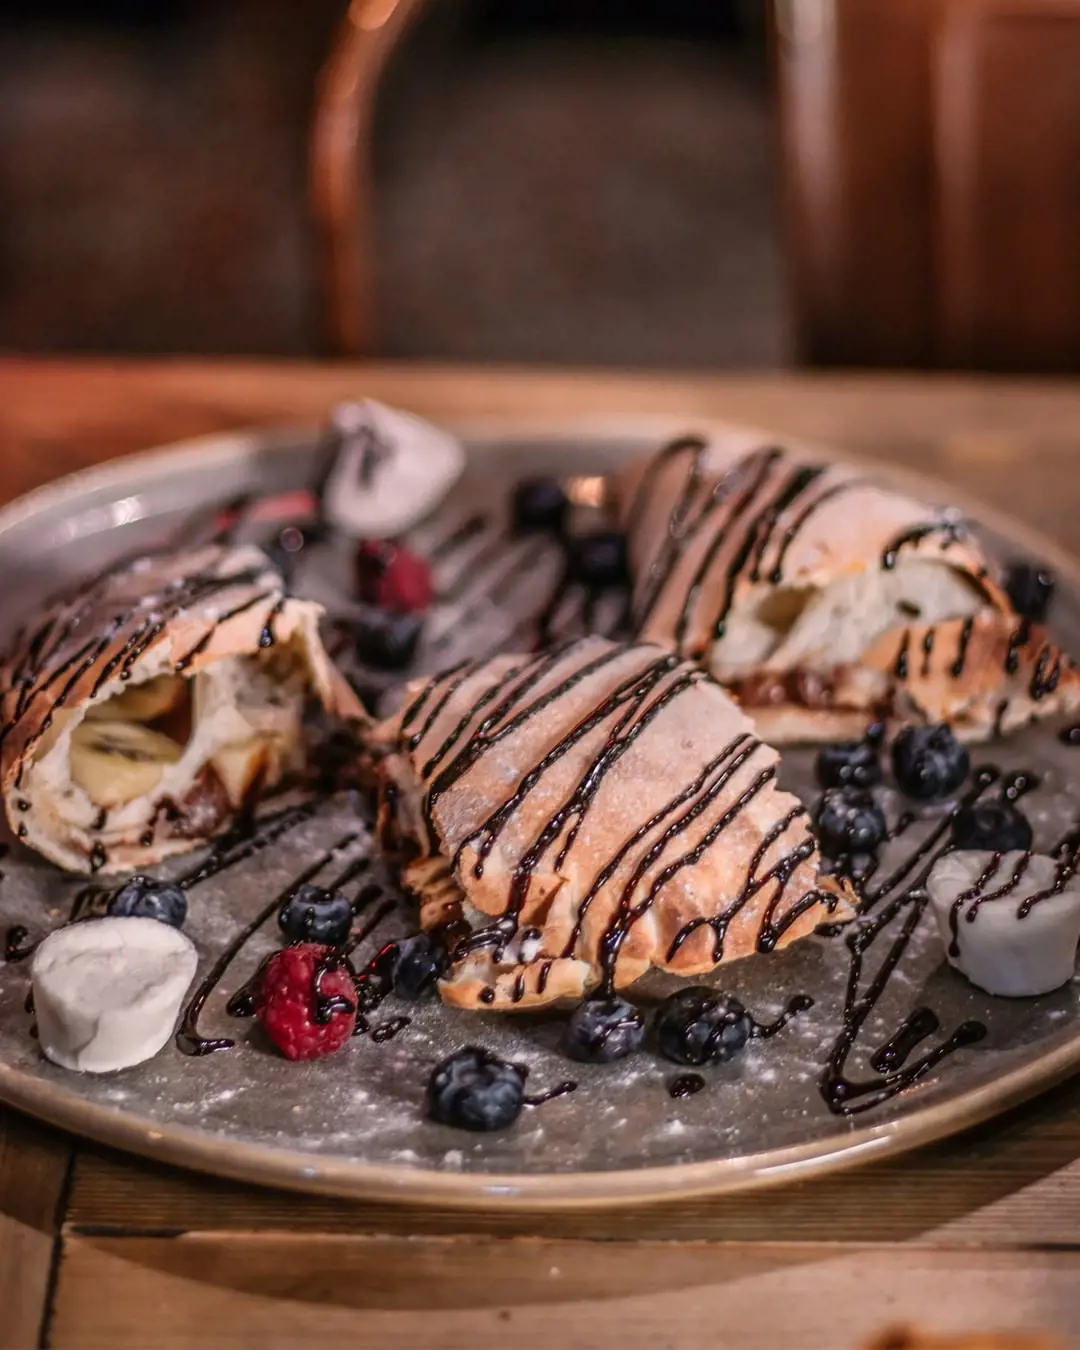 Delicious nutella Calzone's drizzled in chocolate.